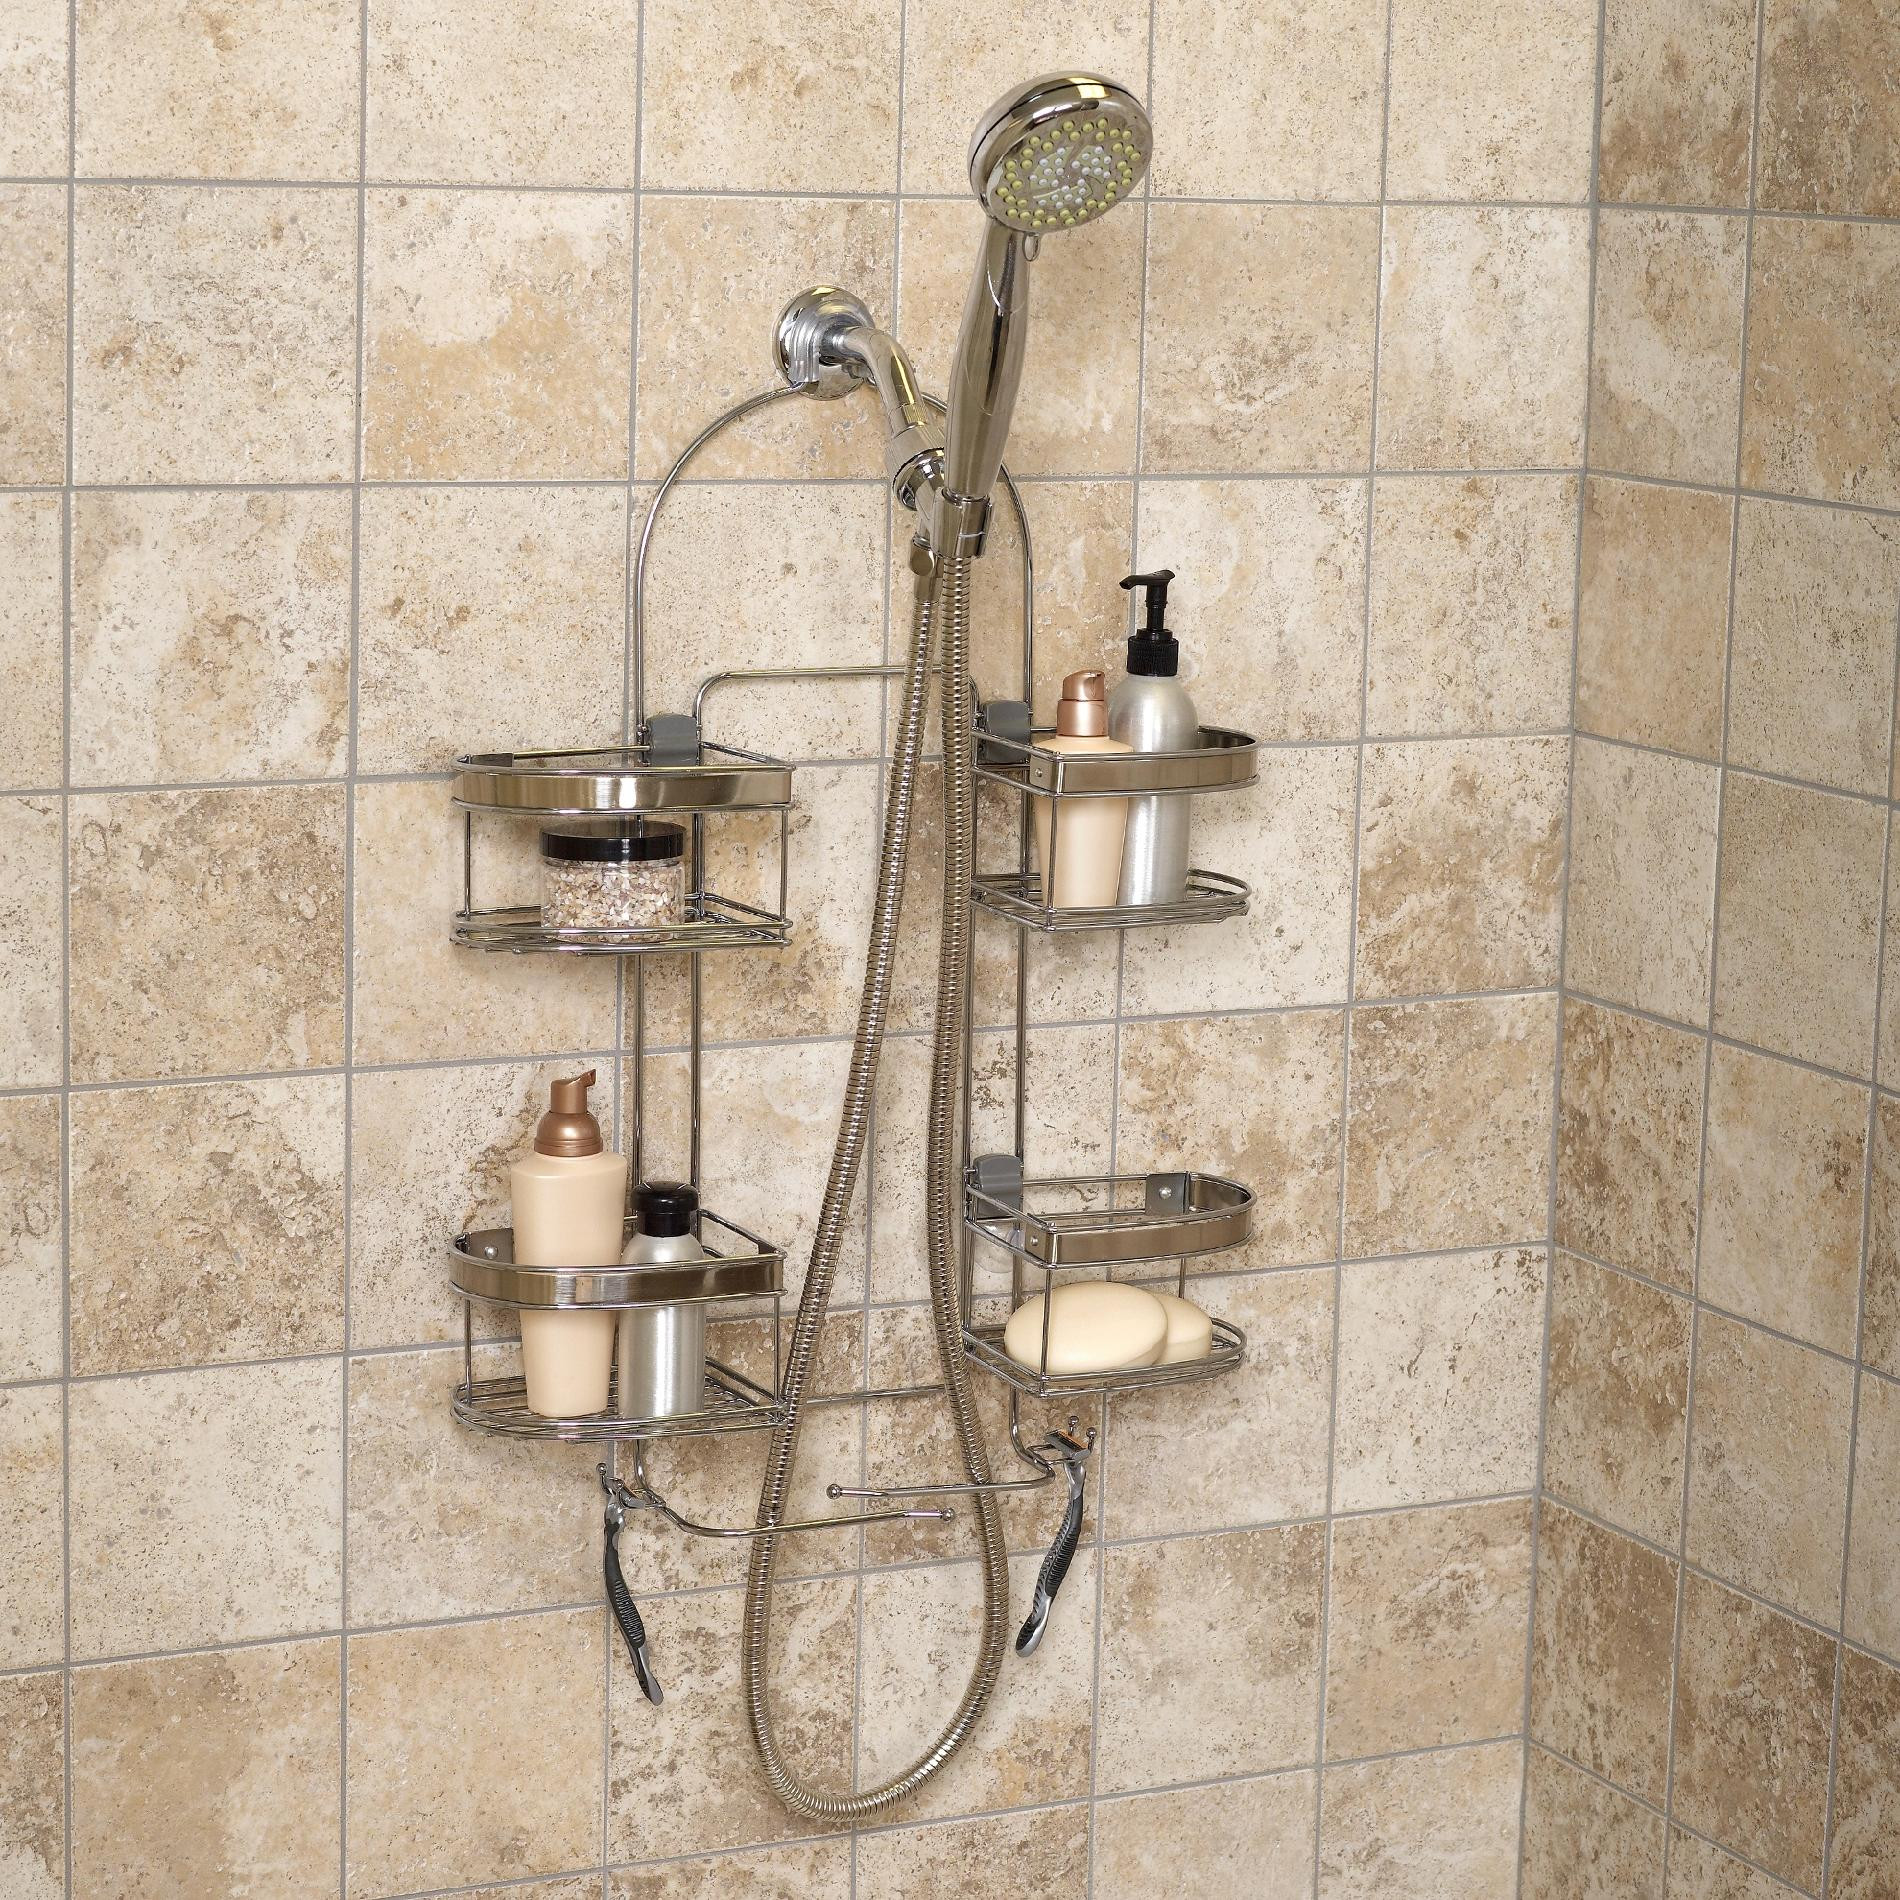 Bathroom Shower Caddy
 Zenith Products "Kemp" Premium Over the Shower Caddy